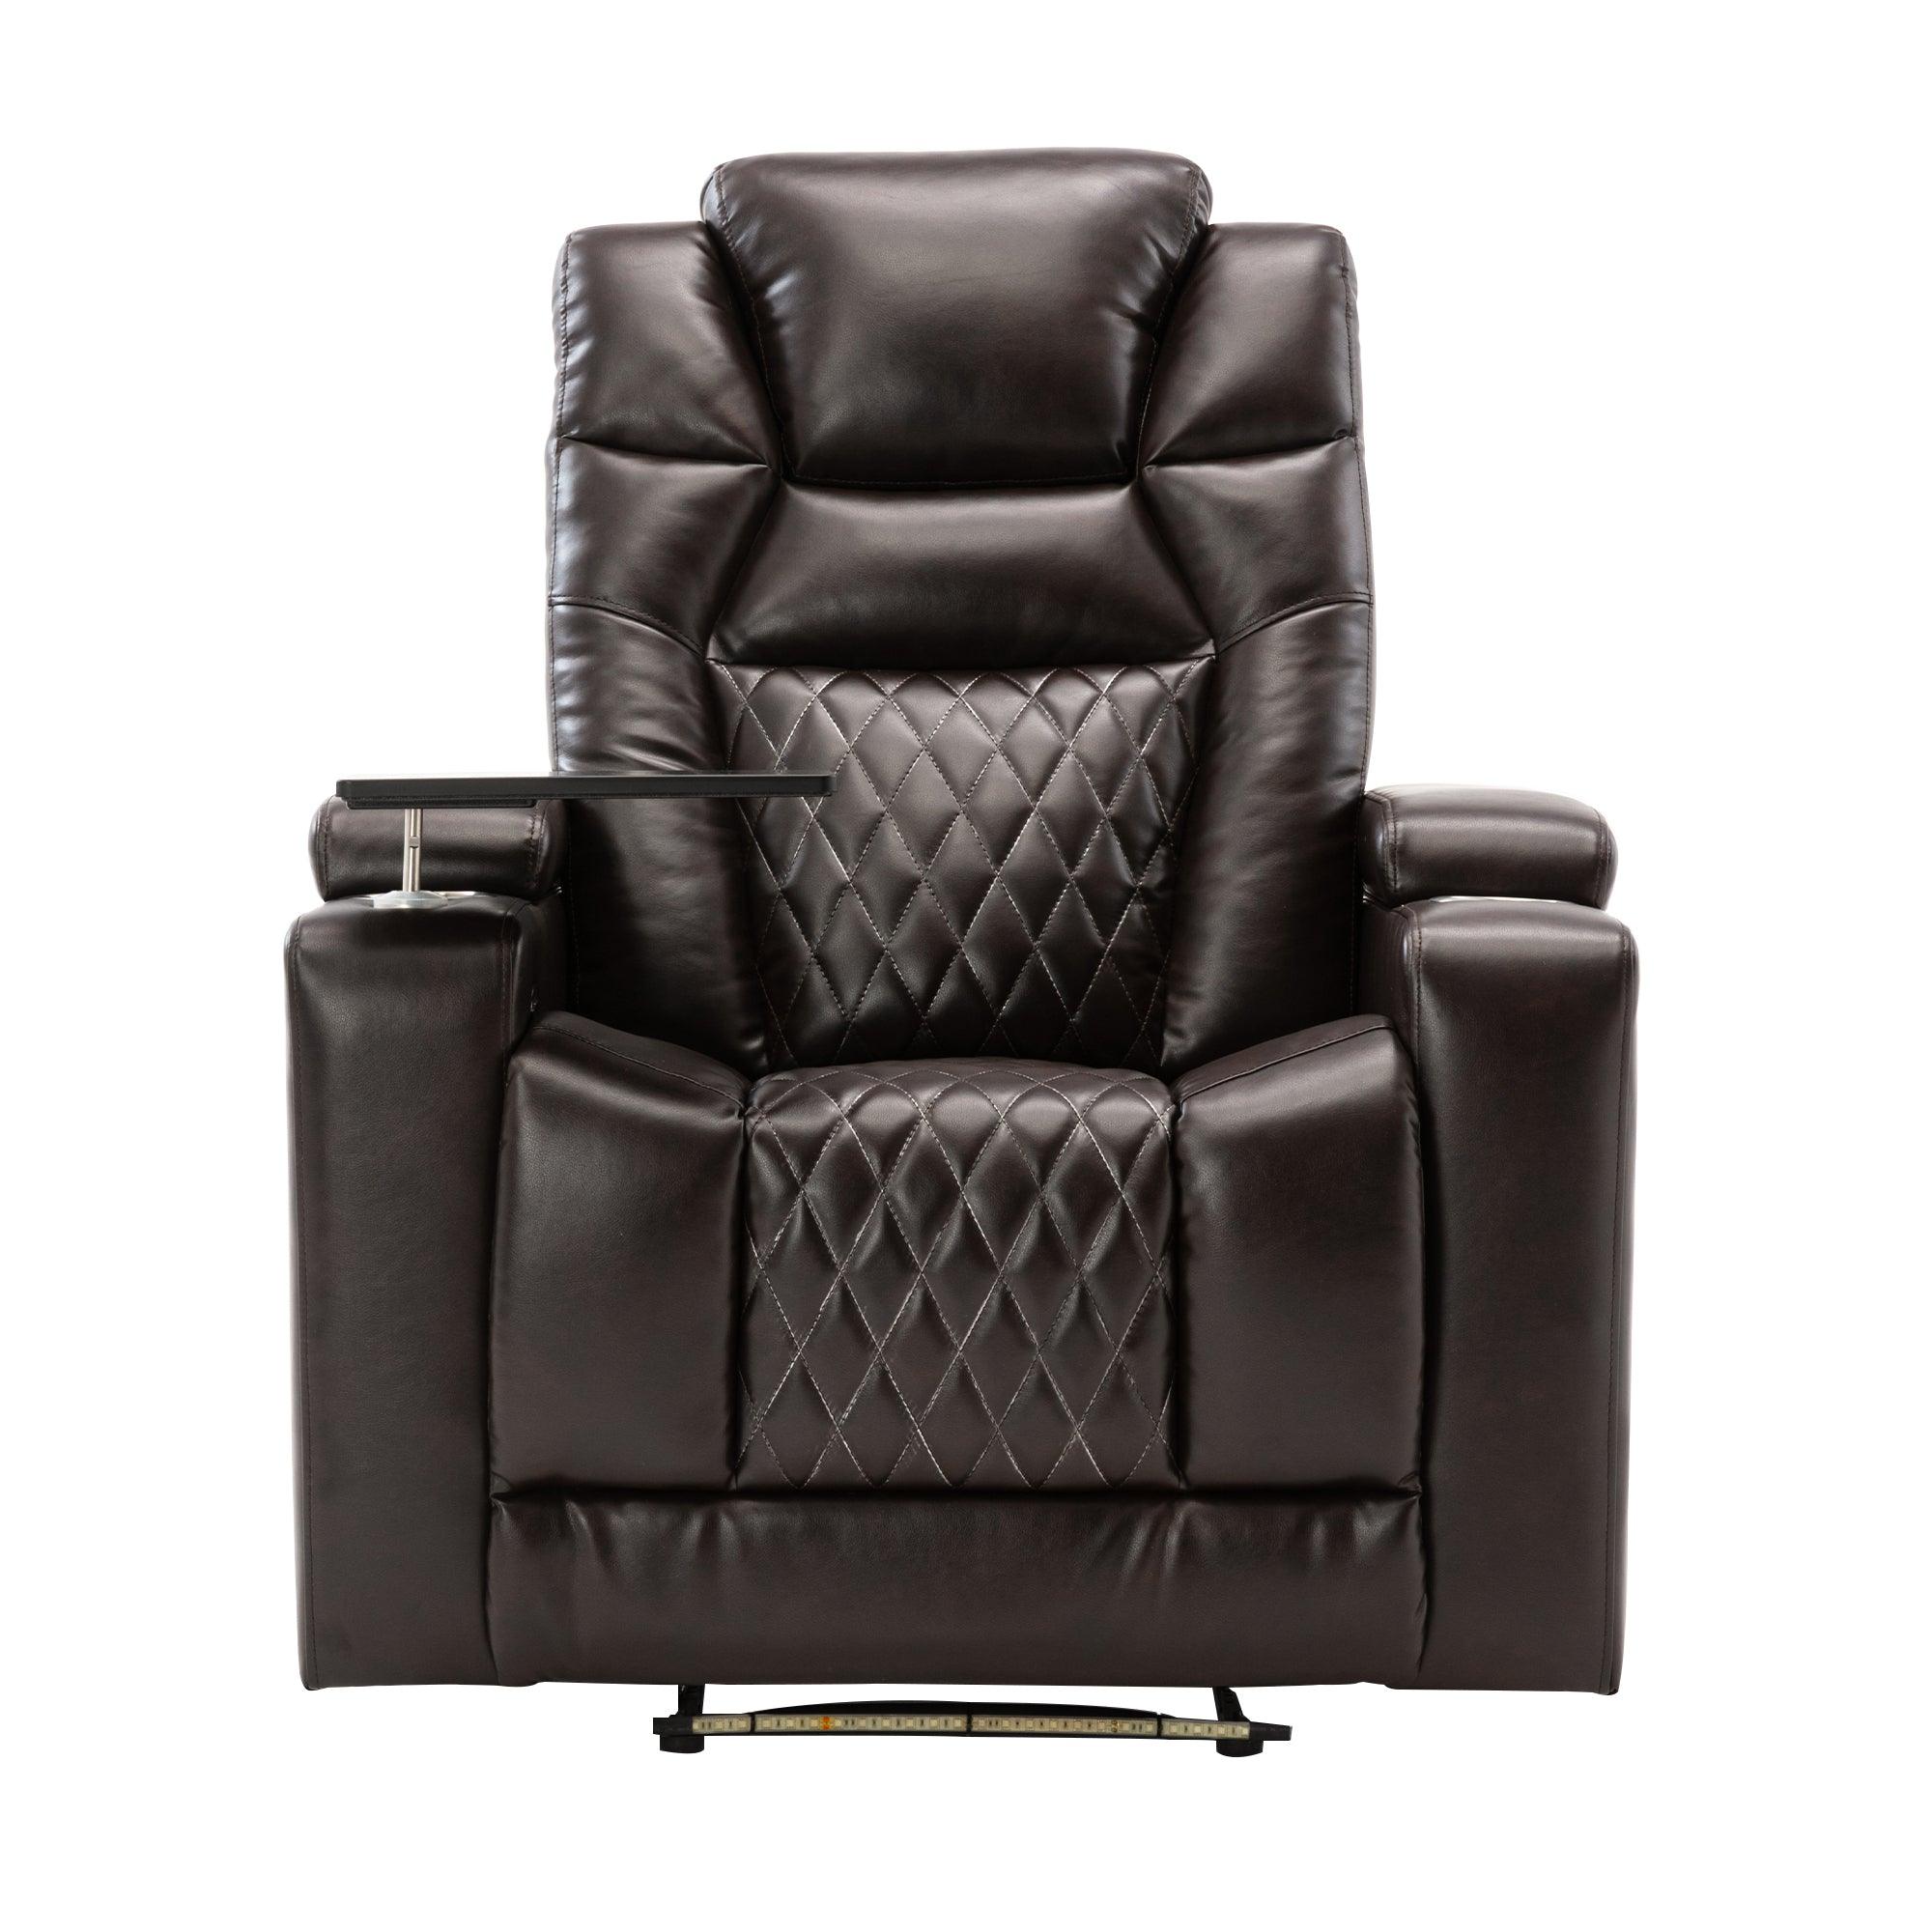 🆓🚛 Motion Recliner With Usb Charging Port & Hidden Arm Storage, Home Theater Seating With 2 Convenient Cup Holders Design & 360° Swivel Tray Table